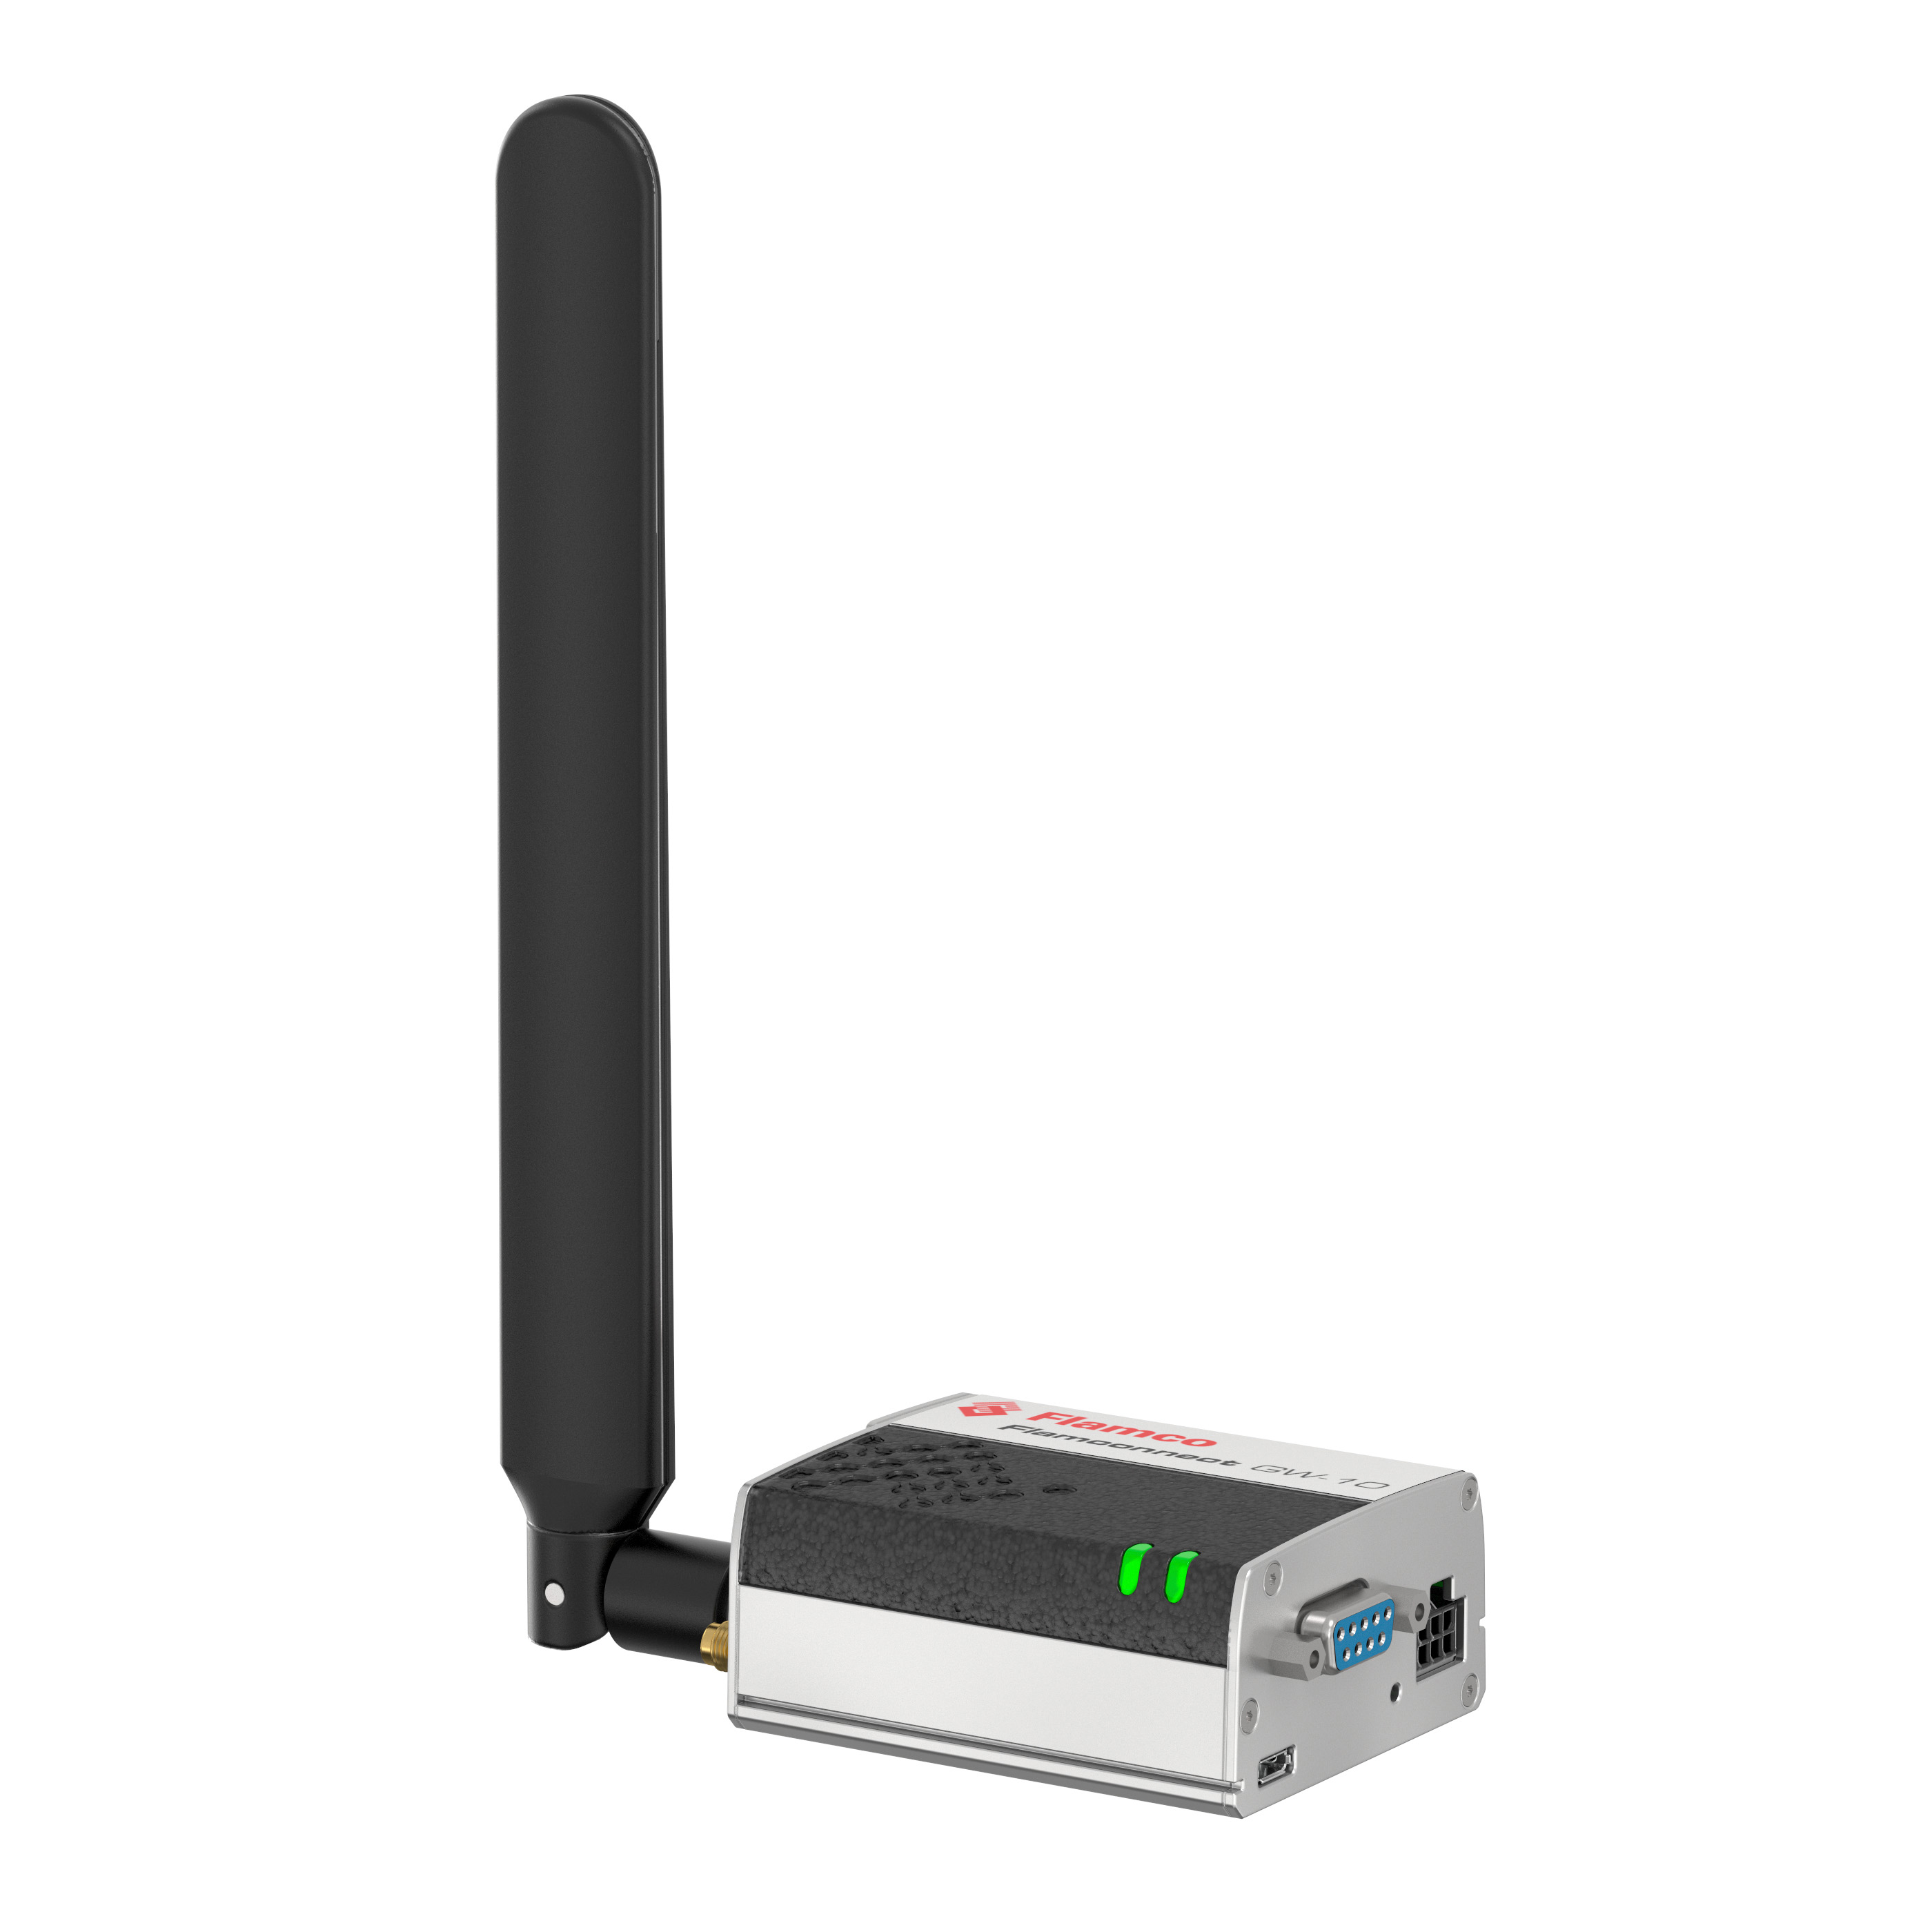 Gateway Flamconnect Remote